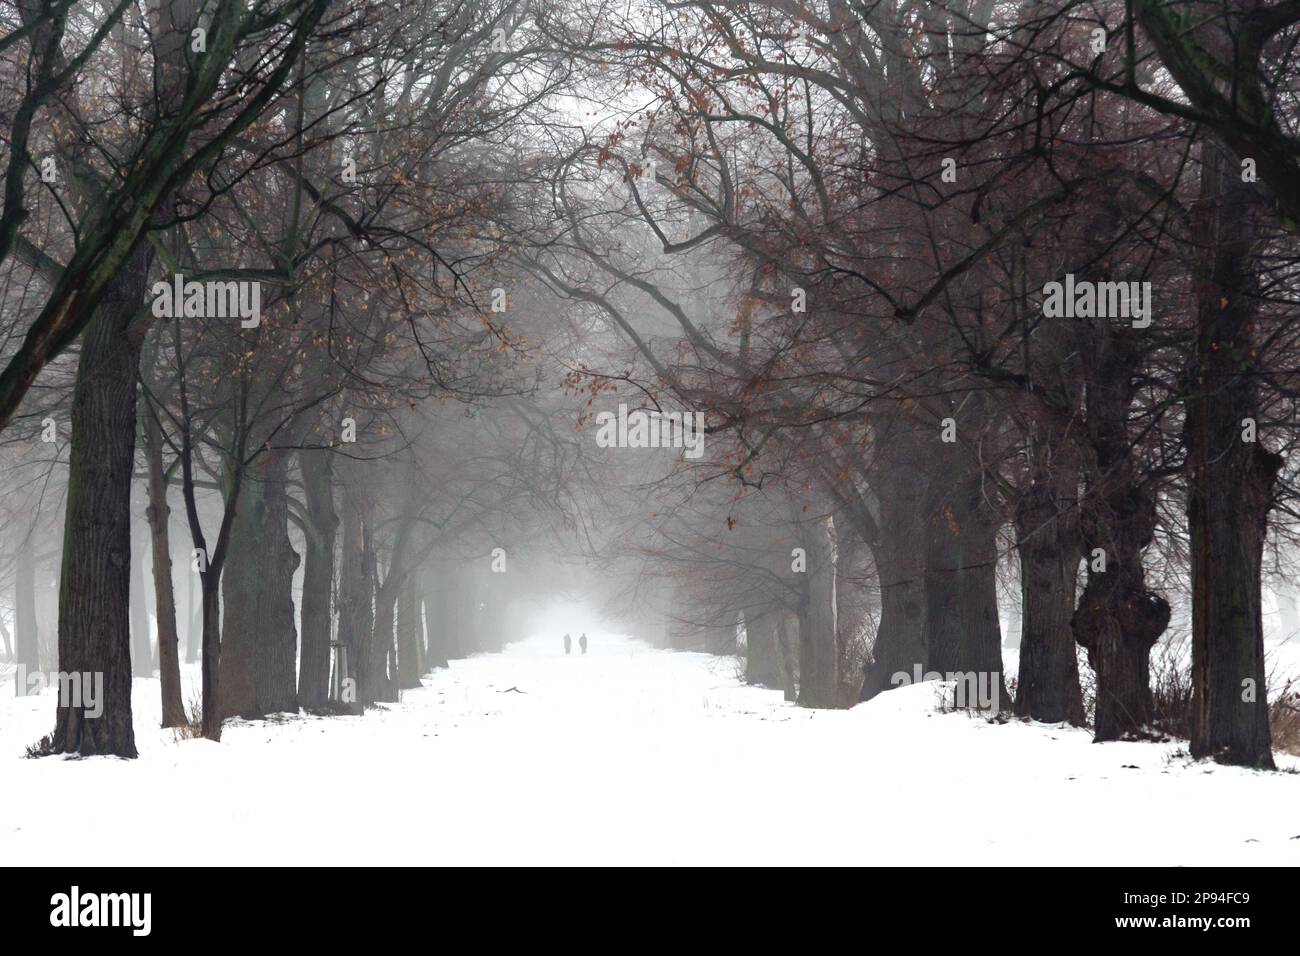 Germany, Brandenburg, Potsdam, view into the linden avenue, an avenue of trees in winter on a foggy winter morning with snow, walkers in the middle, blur Stock Photo